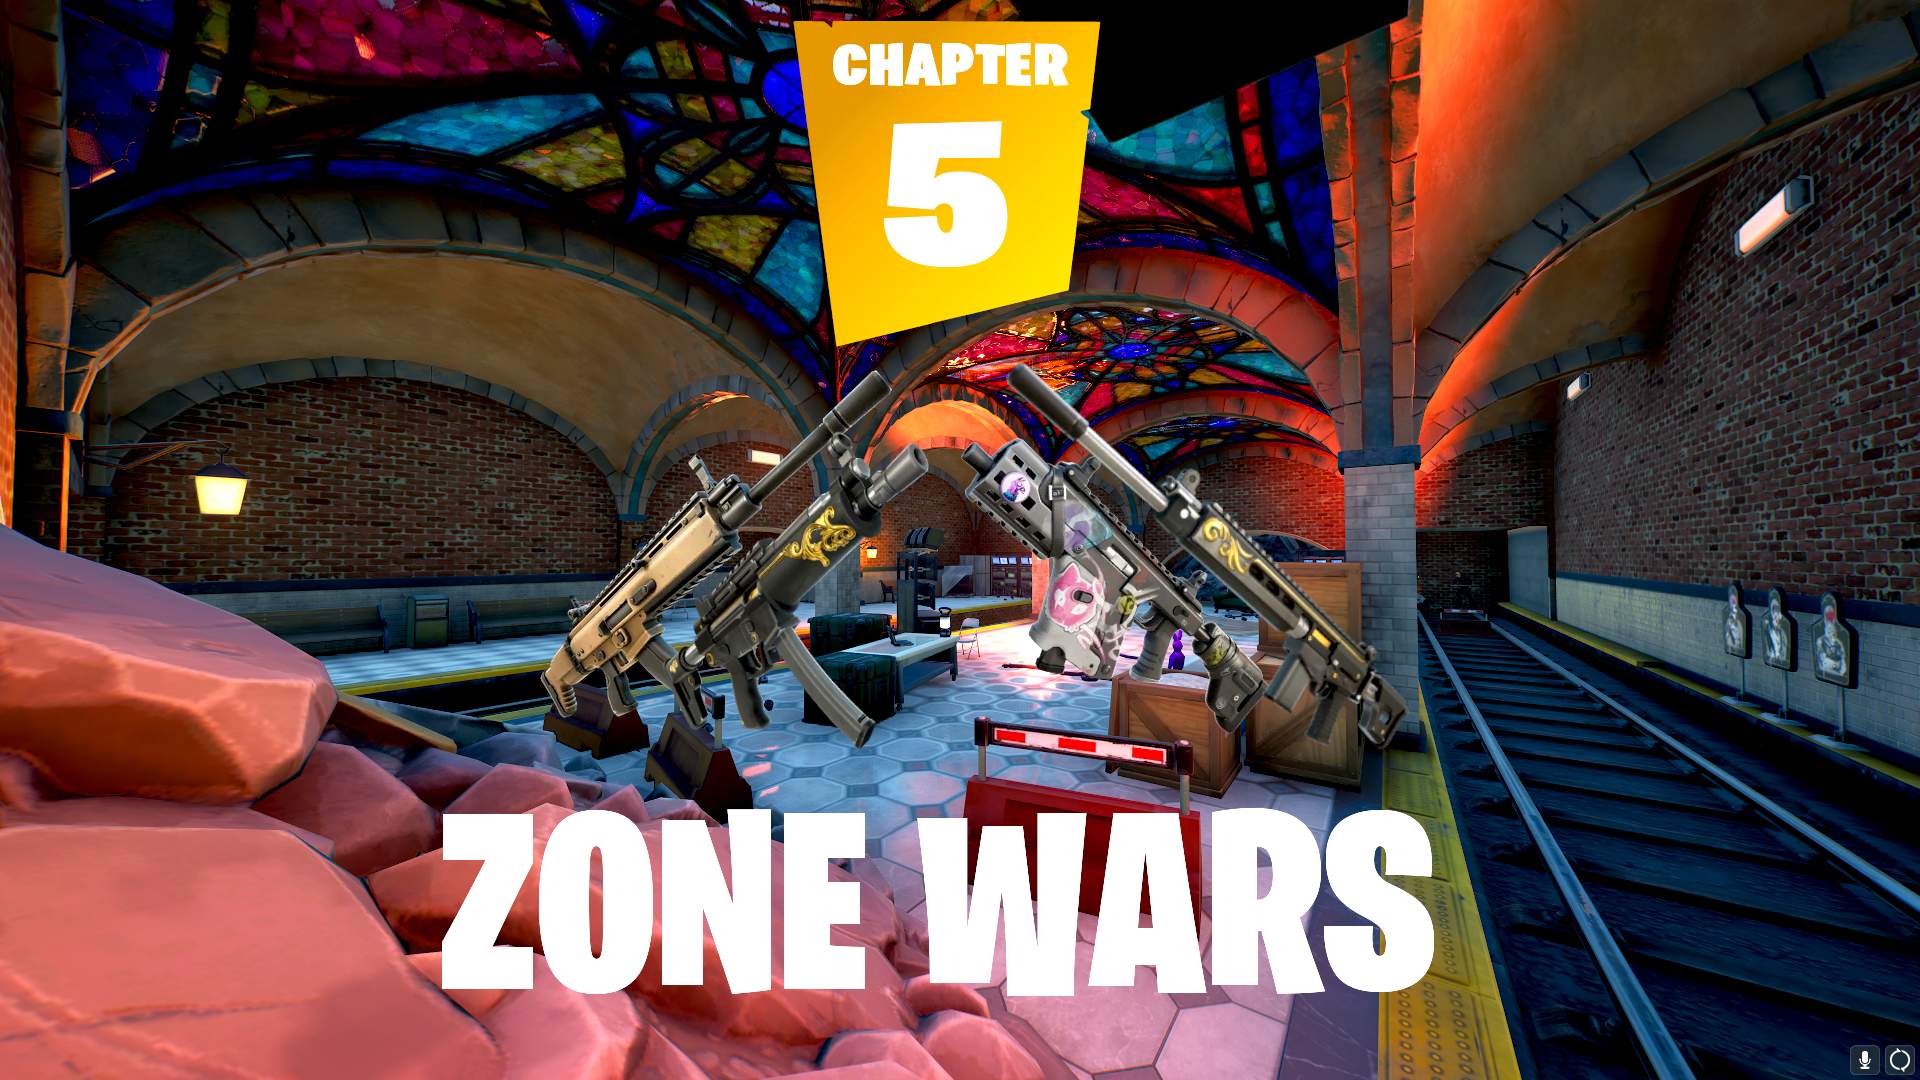 ⭐CHAPTER 5 ZONE WARS⭐